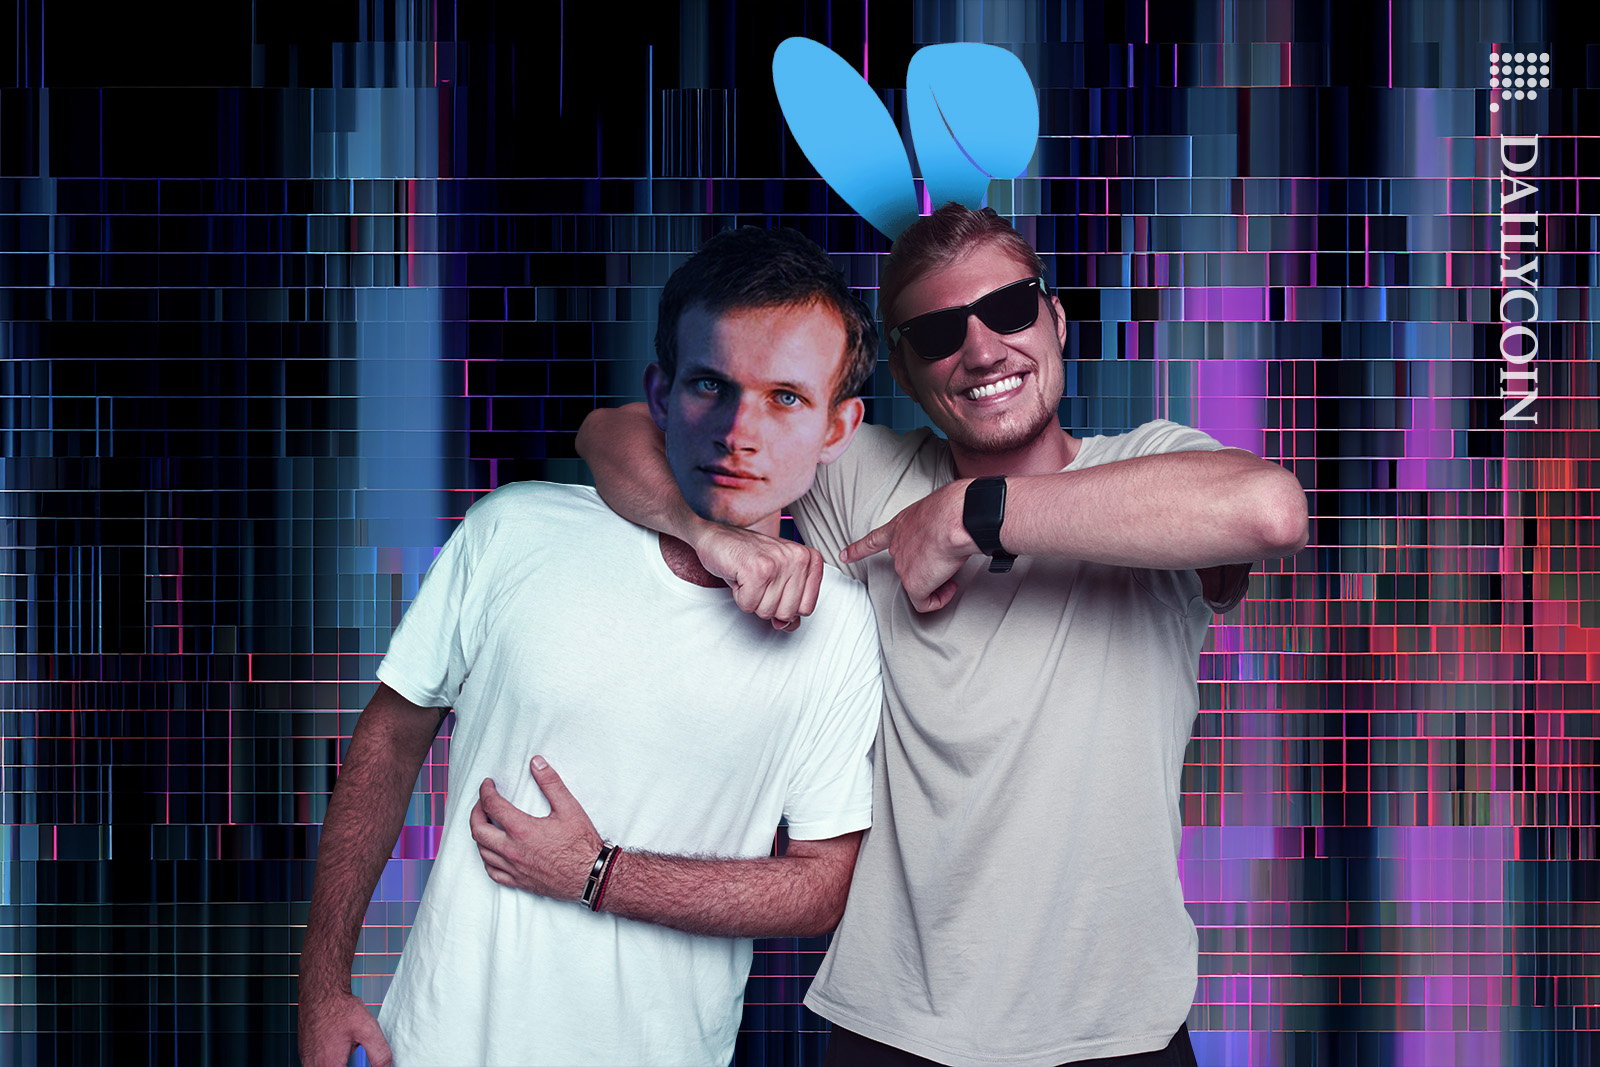 Vitalik Buterin appears to be uncomfortable as a very excited man clings on him.